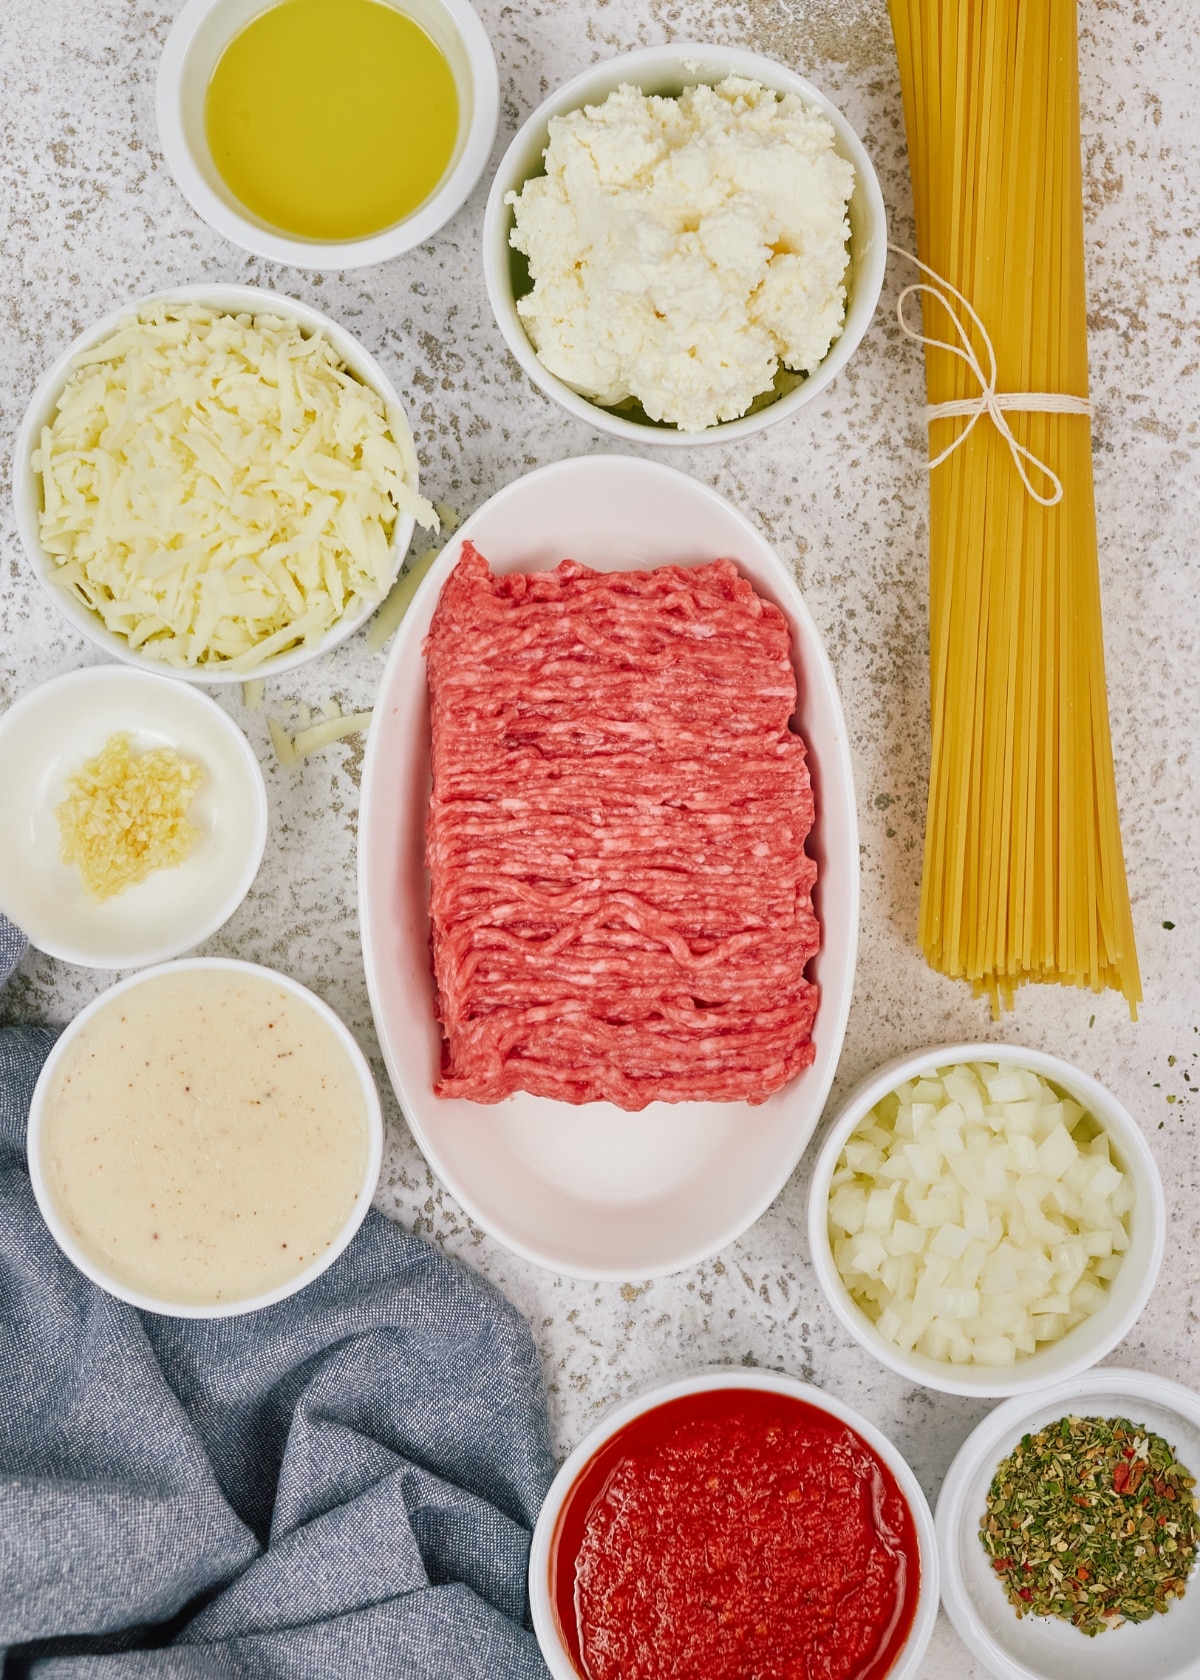 ingredients for spaghetti casserole in small bowls